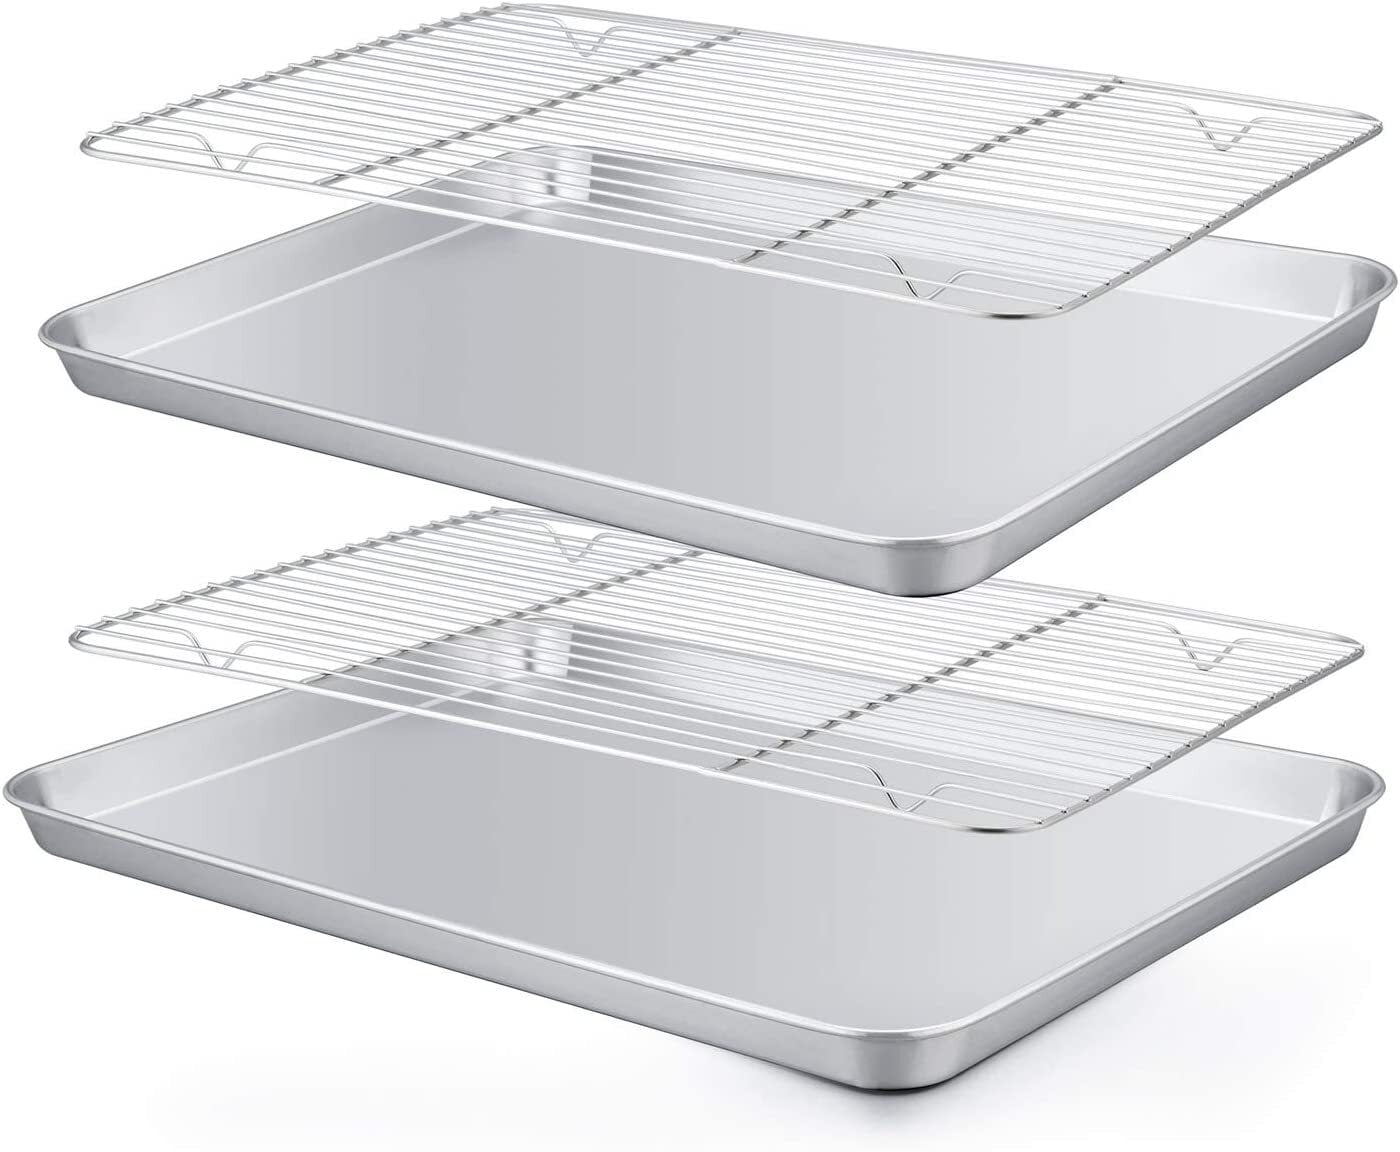 Baking Sheet With Rack Set Sheets Racks Stainless Steel Cookie